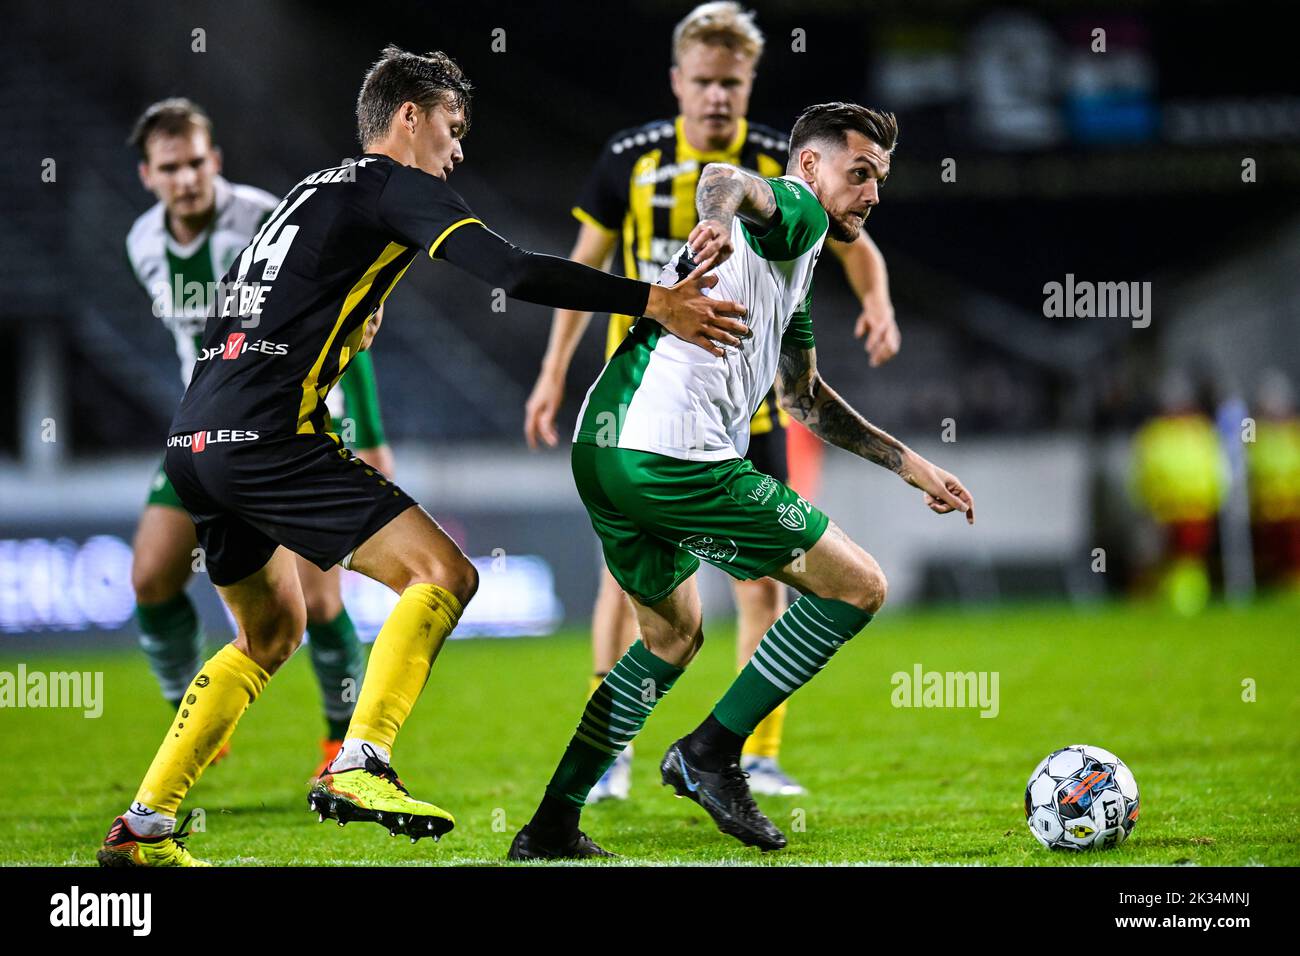 Lierse's Maxime De Bie and Racing's Gregory Carrez pictured in action during a soccer game between Lierse Kempenzonen and Koninklijke Racing Club Mechelen, Saturday 24 September 2022 in Lier, in the fifth round of the 'Croky Cup' Belgian cup. BELGA PHOTO TOM GOYVAERTS Stock Photo